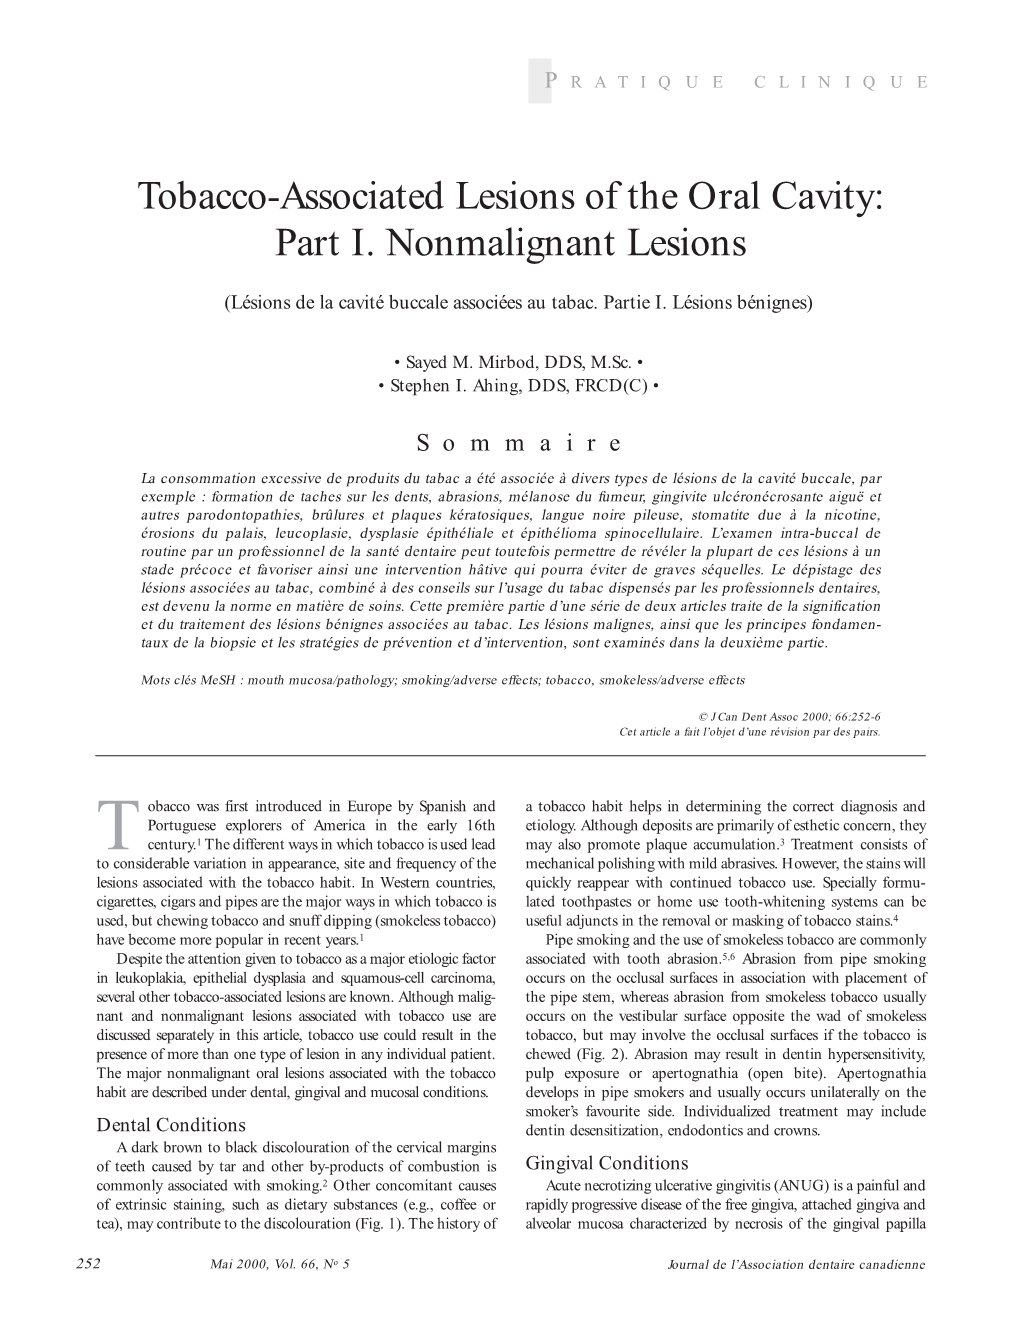 Tobacco-Associated Lesions of the Oral Cavity: Part I